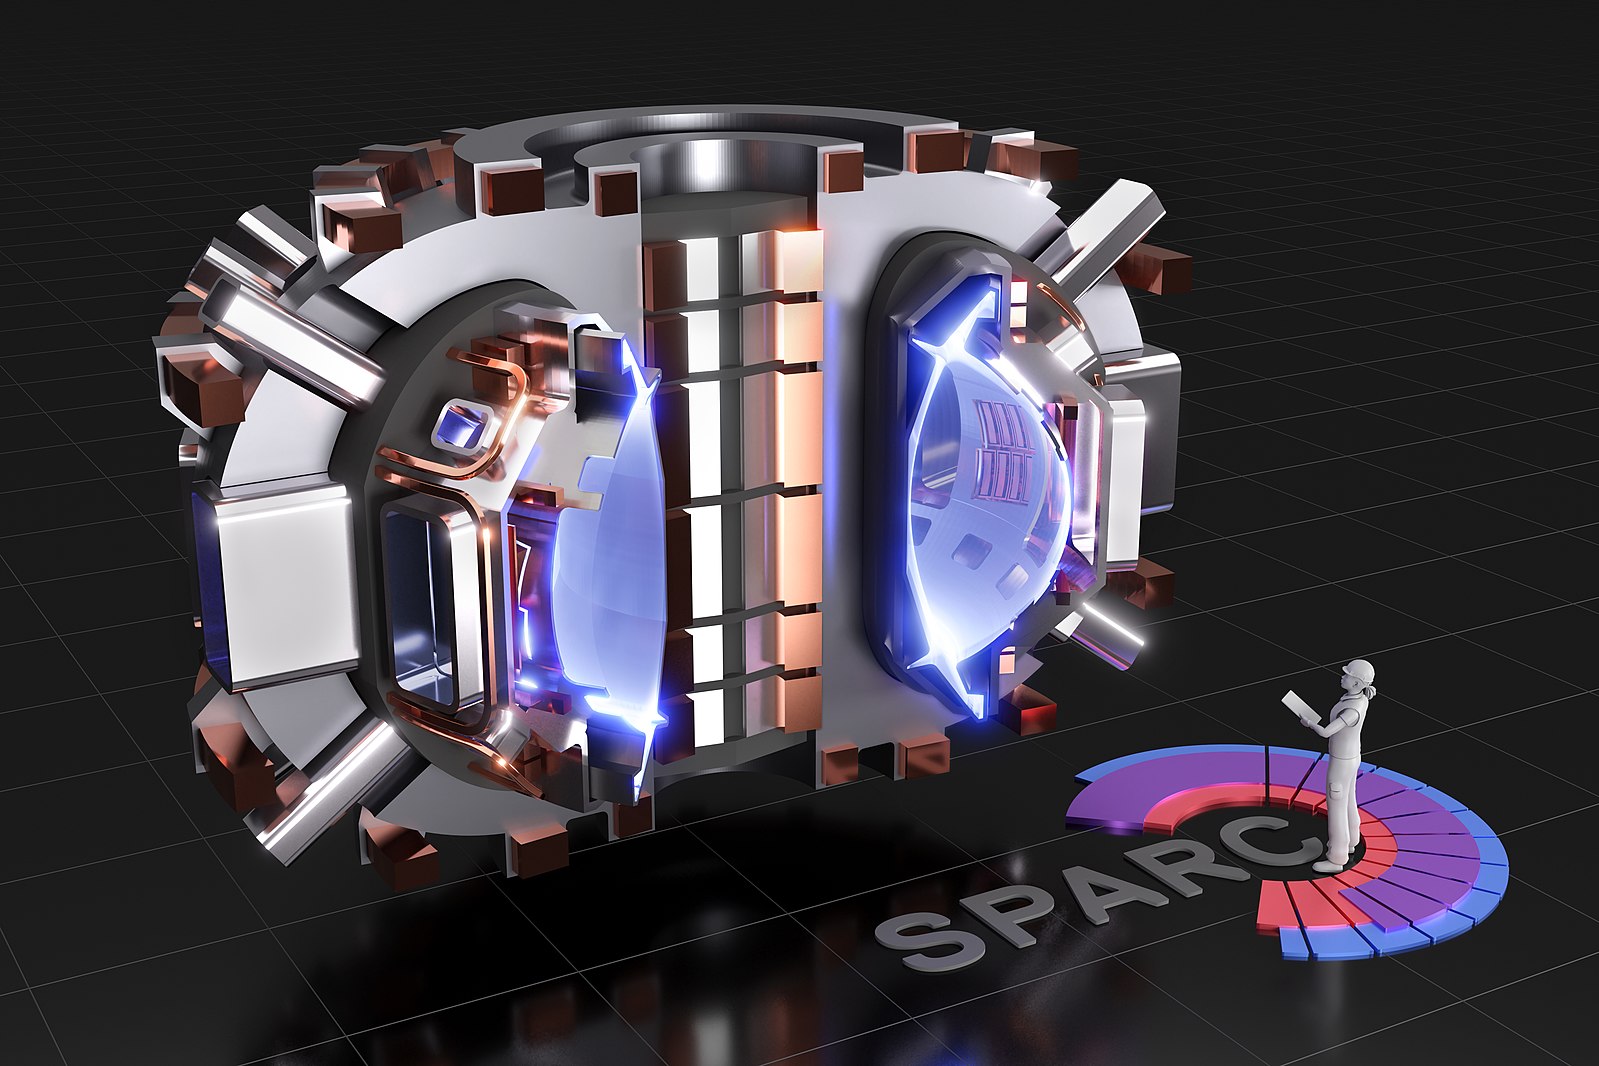 Rendering of SPARC, a compact, high-field, DT burning tokamak, currently under design by a team from the Massachusetts Institute of Technology and Commonwealth Fusion Systems. Its mission is to create and confine a plasma that produces net fusion energy.